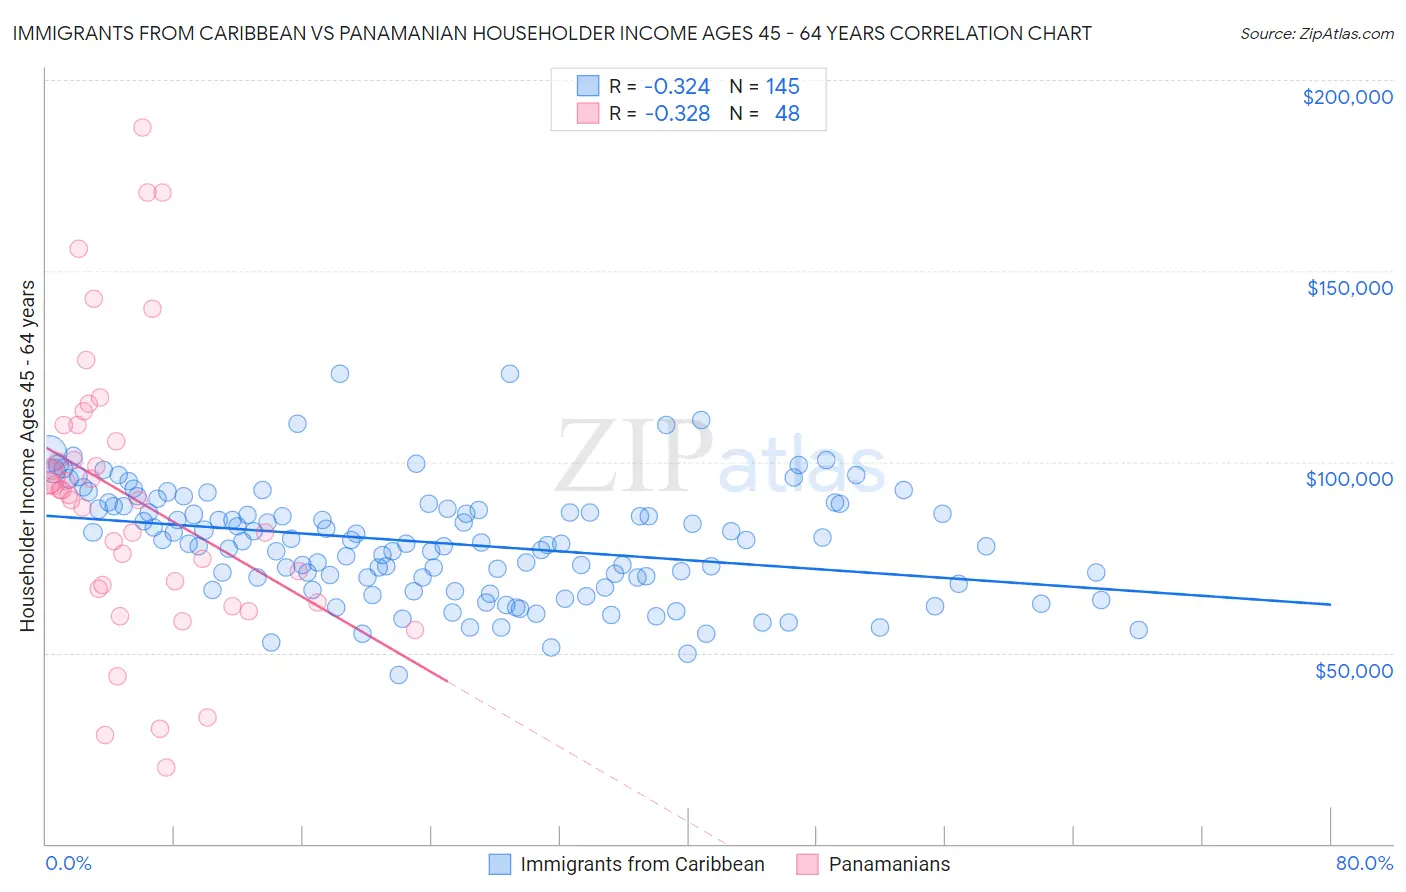 Immigrants from Caribbean vs Panamanian Householder Income Ages 45 - 64 years